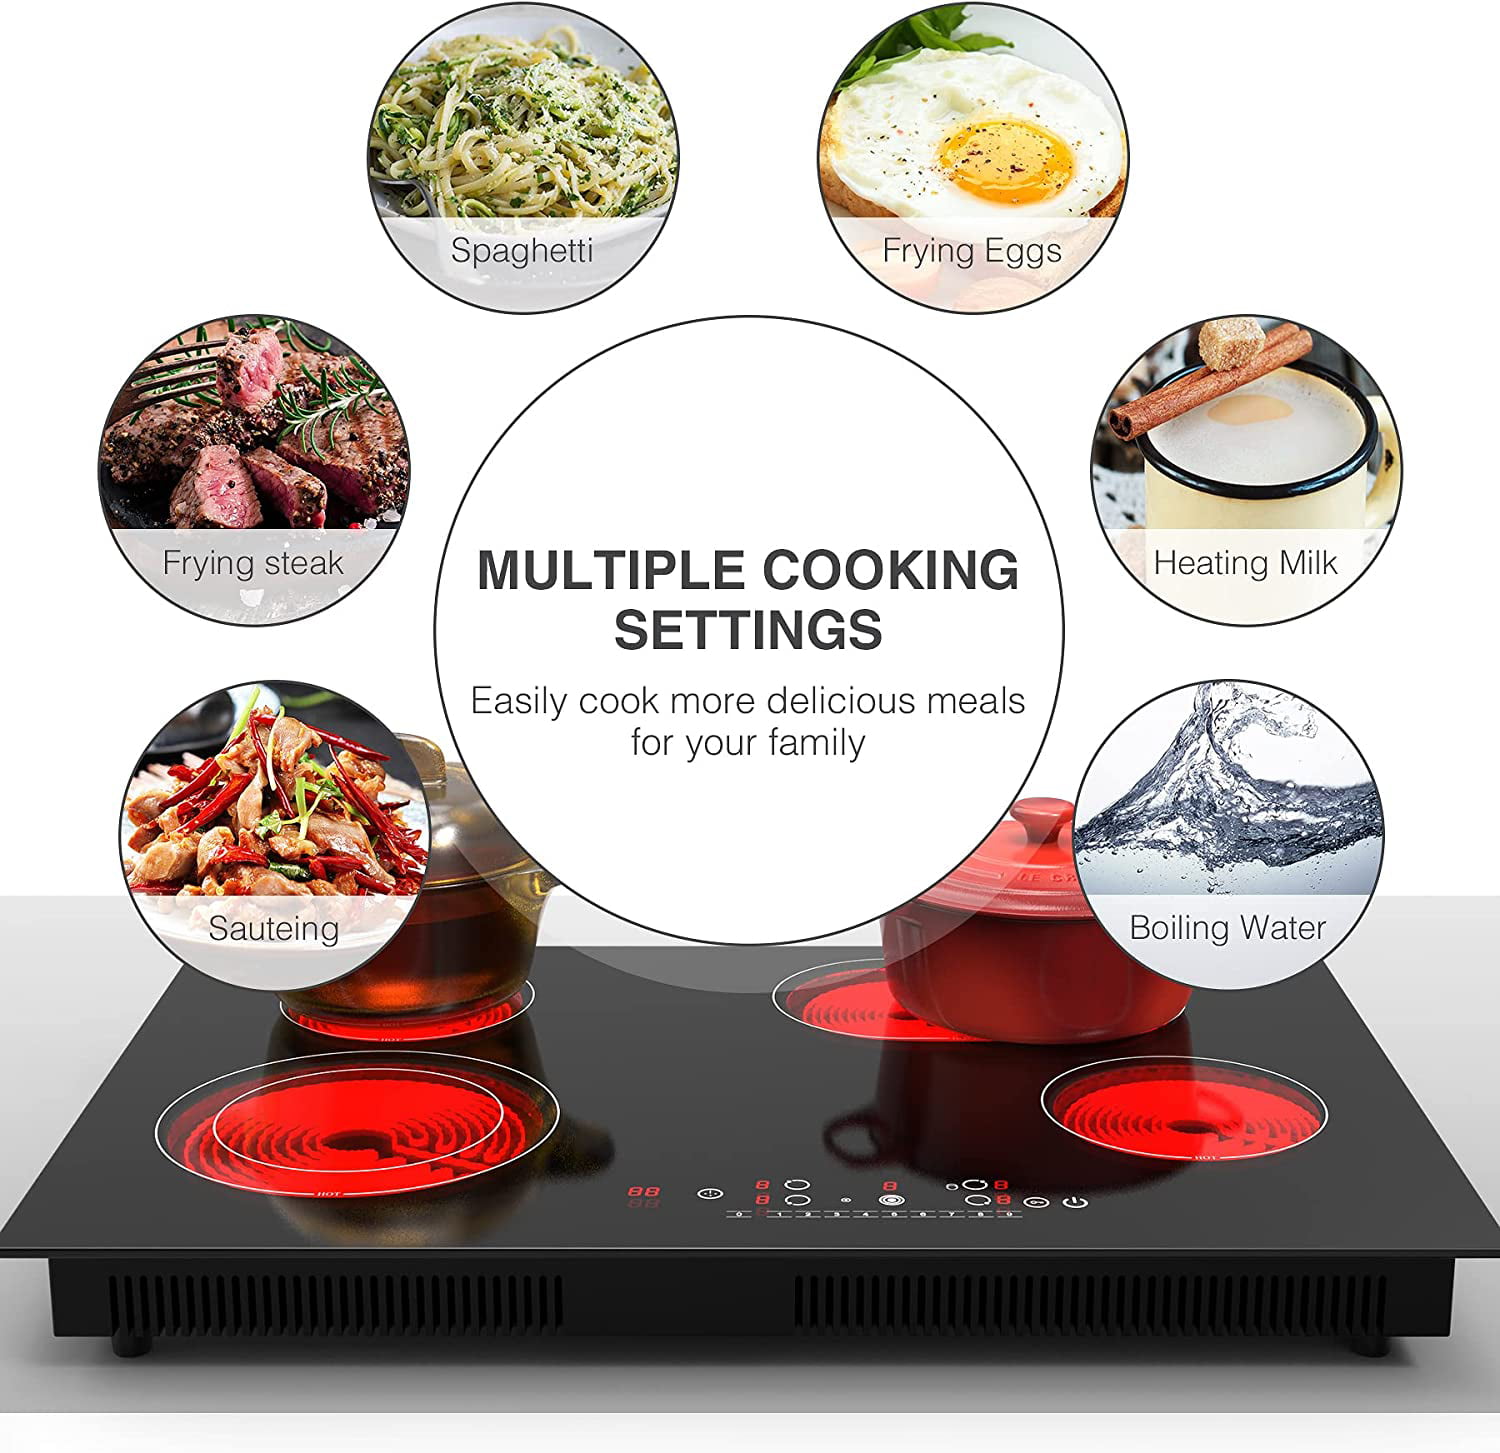 VBGK Electric Cooktop 30 inch 7200W, Electric Cooktop 4 Burners and  Built-in Hot Plate for Cooking,99 Minutes Timer Electric Stove Top 220v  without Plug Compatible with All Cookware 